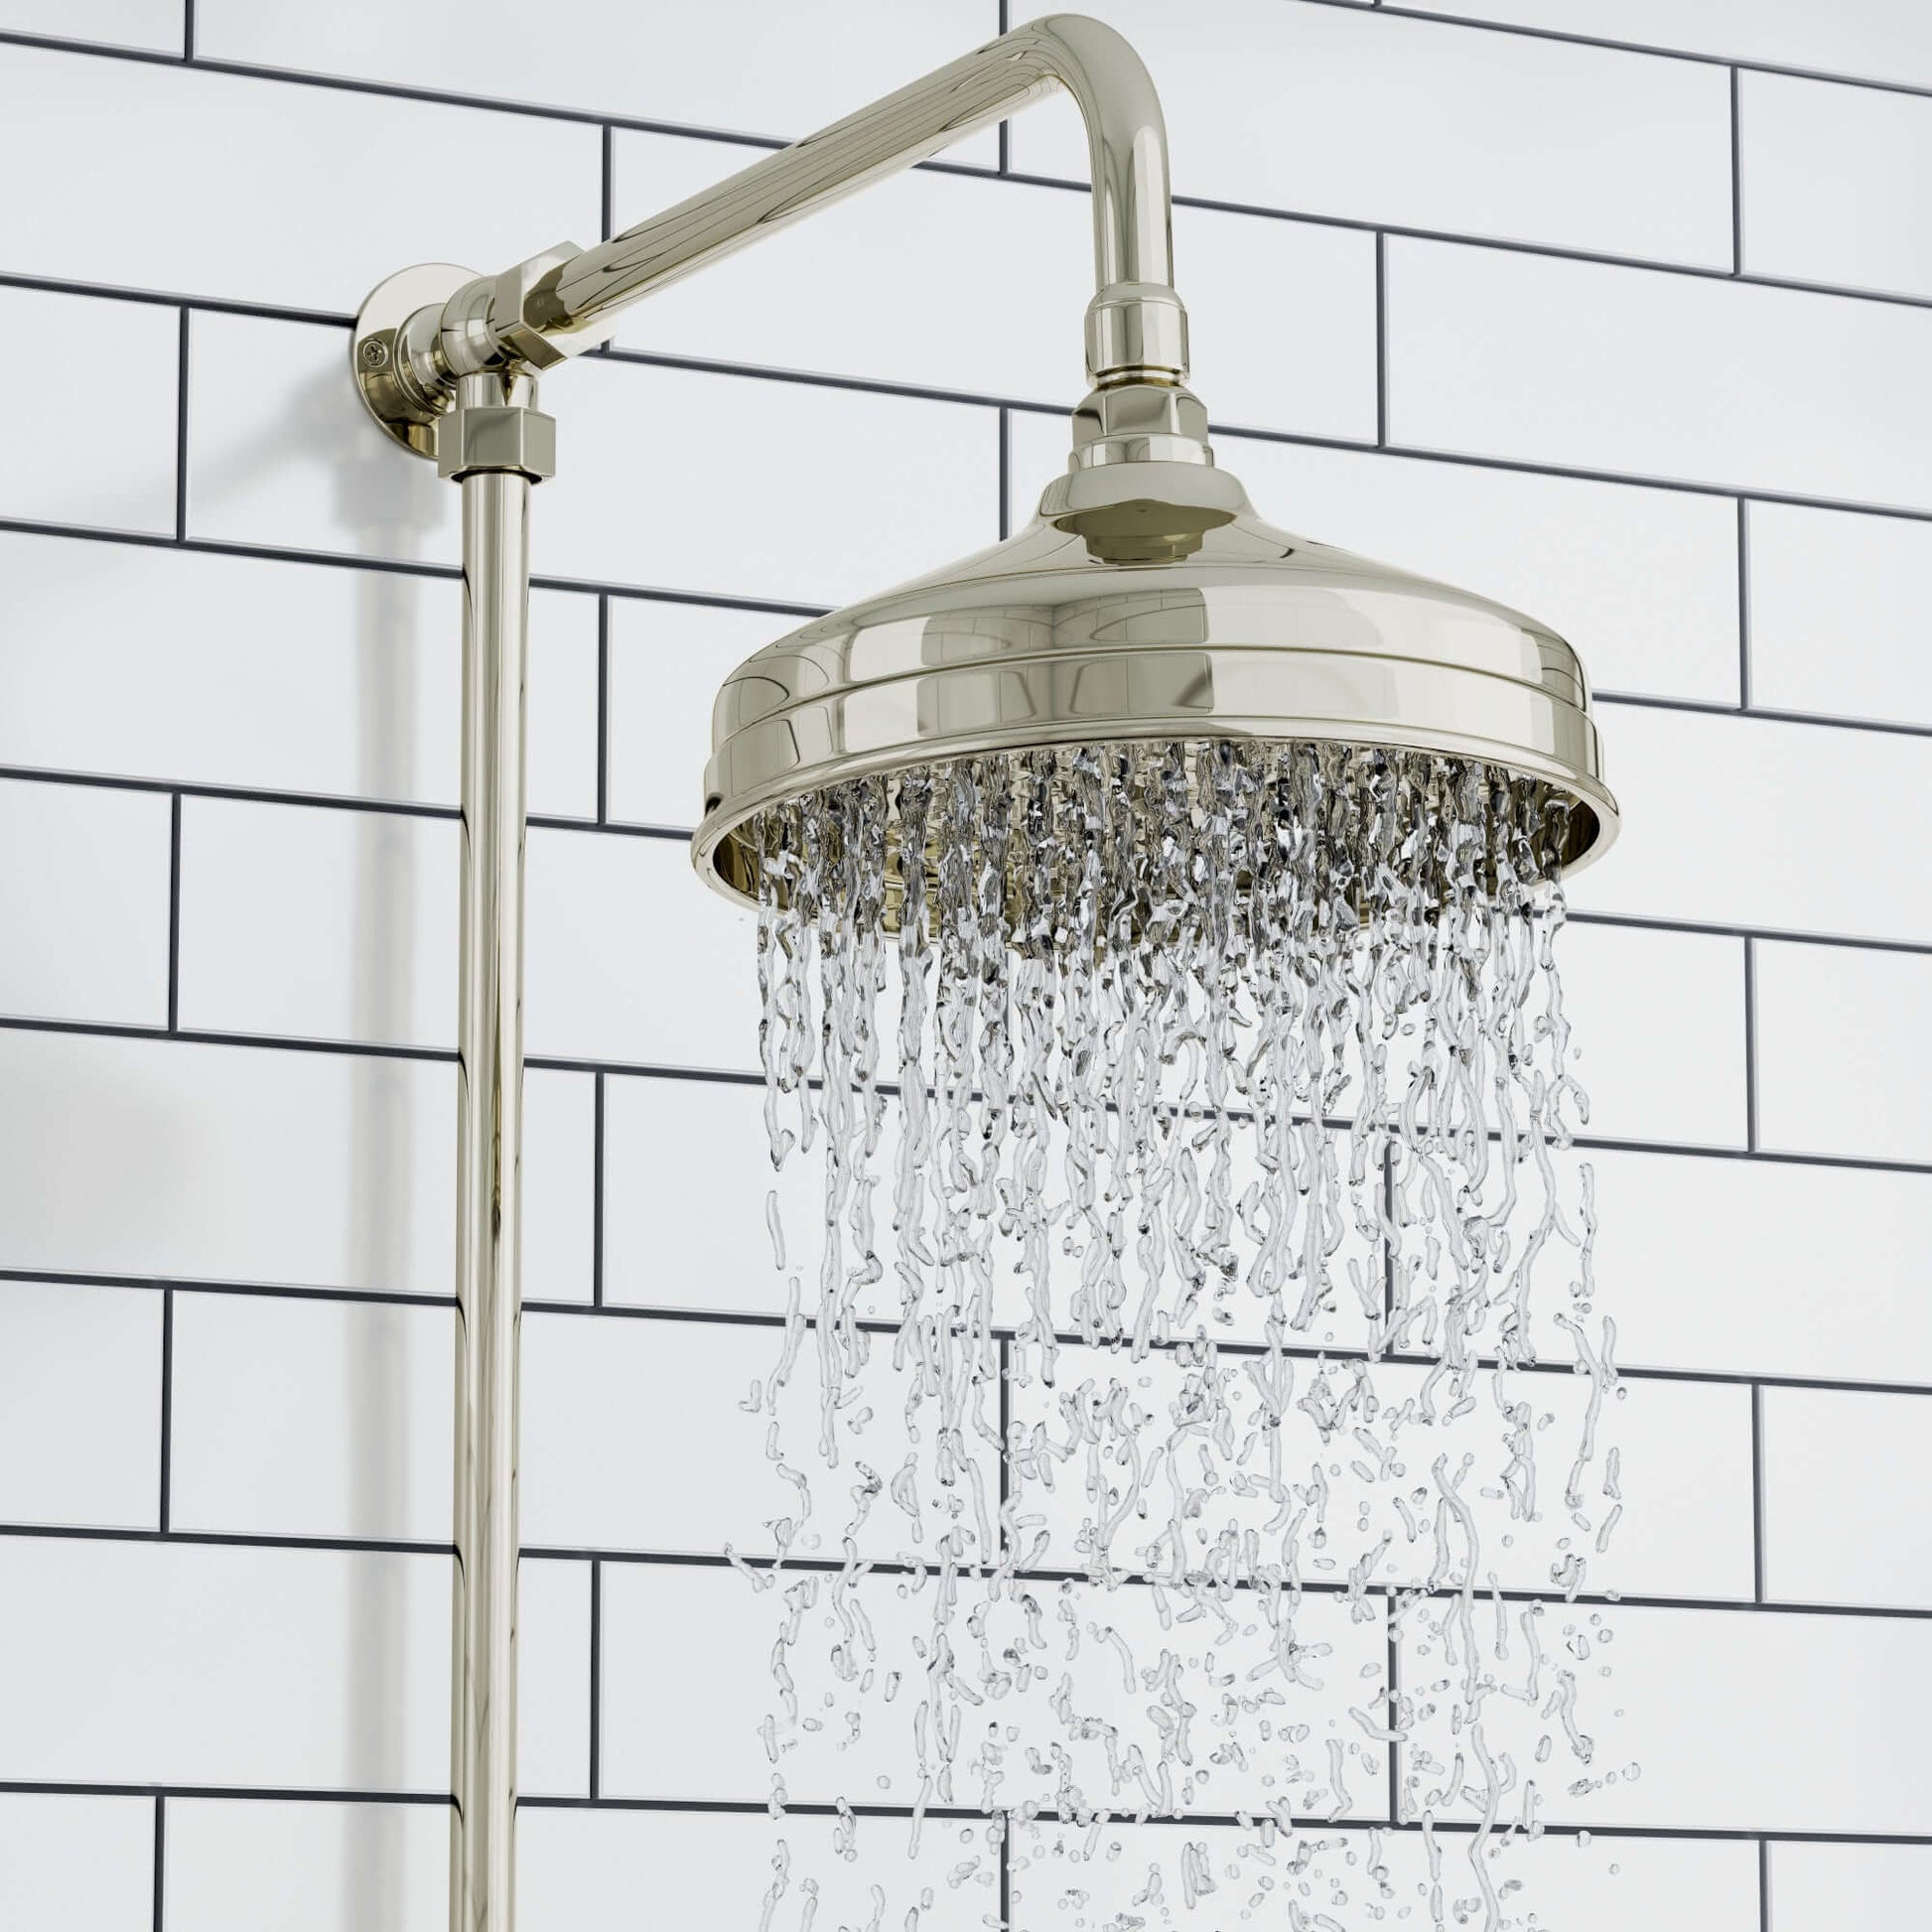 Downton Exposed Traditional Thermostatic Shower Set 2 Outlet, Incl. Triple Shower Valve, Rigid Riser Rail, 200mm Shower Head, Telephone Style Ceramic Handset & Caddy - English Gold And White - Showers